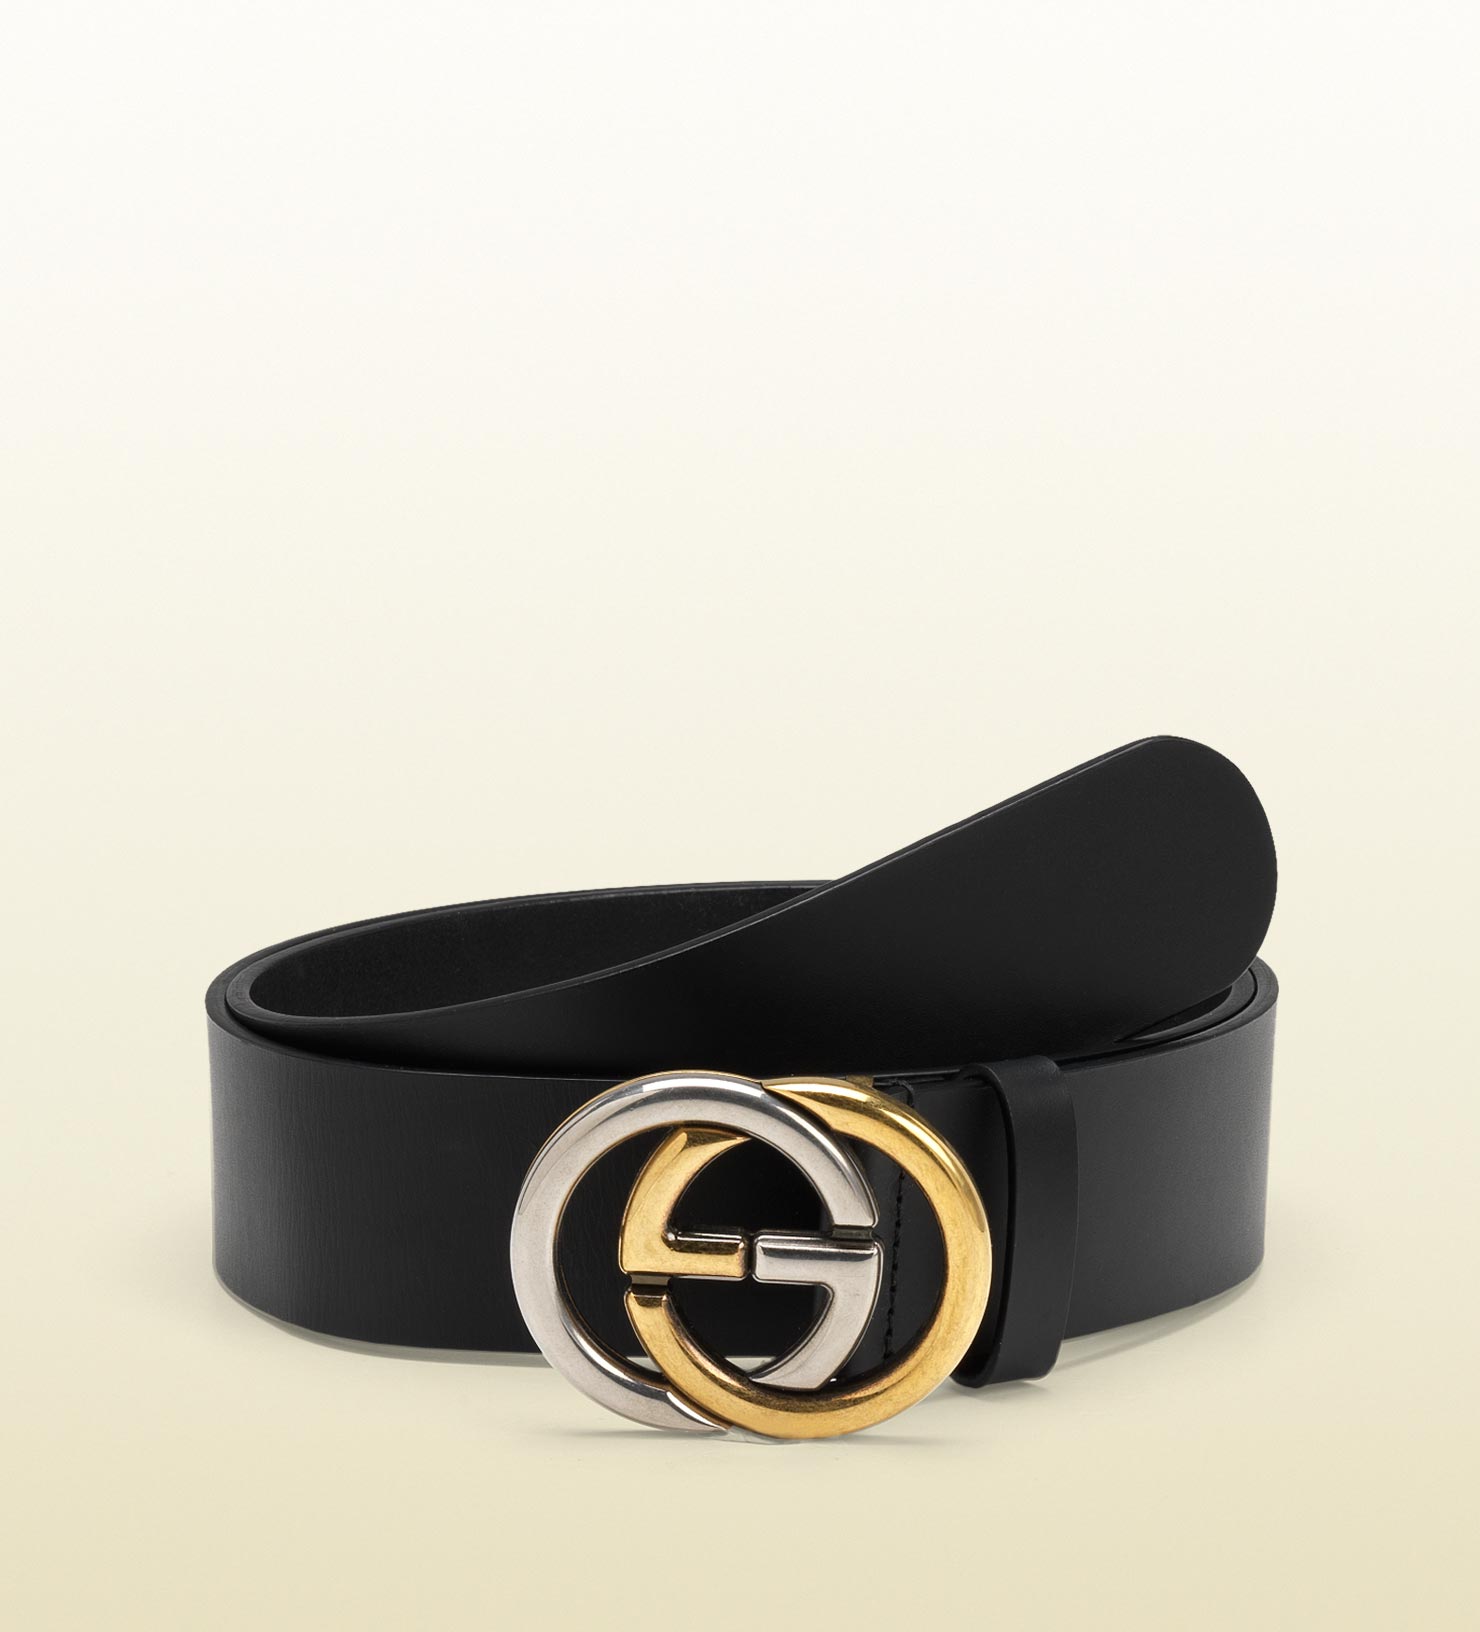 Gucci Leather Belt With Bi-color Interlocking G Buckle in Black | Lyst UK